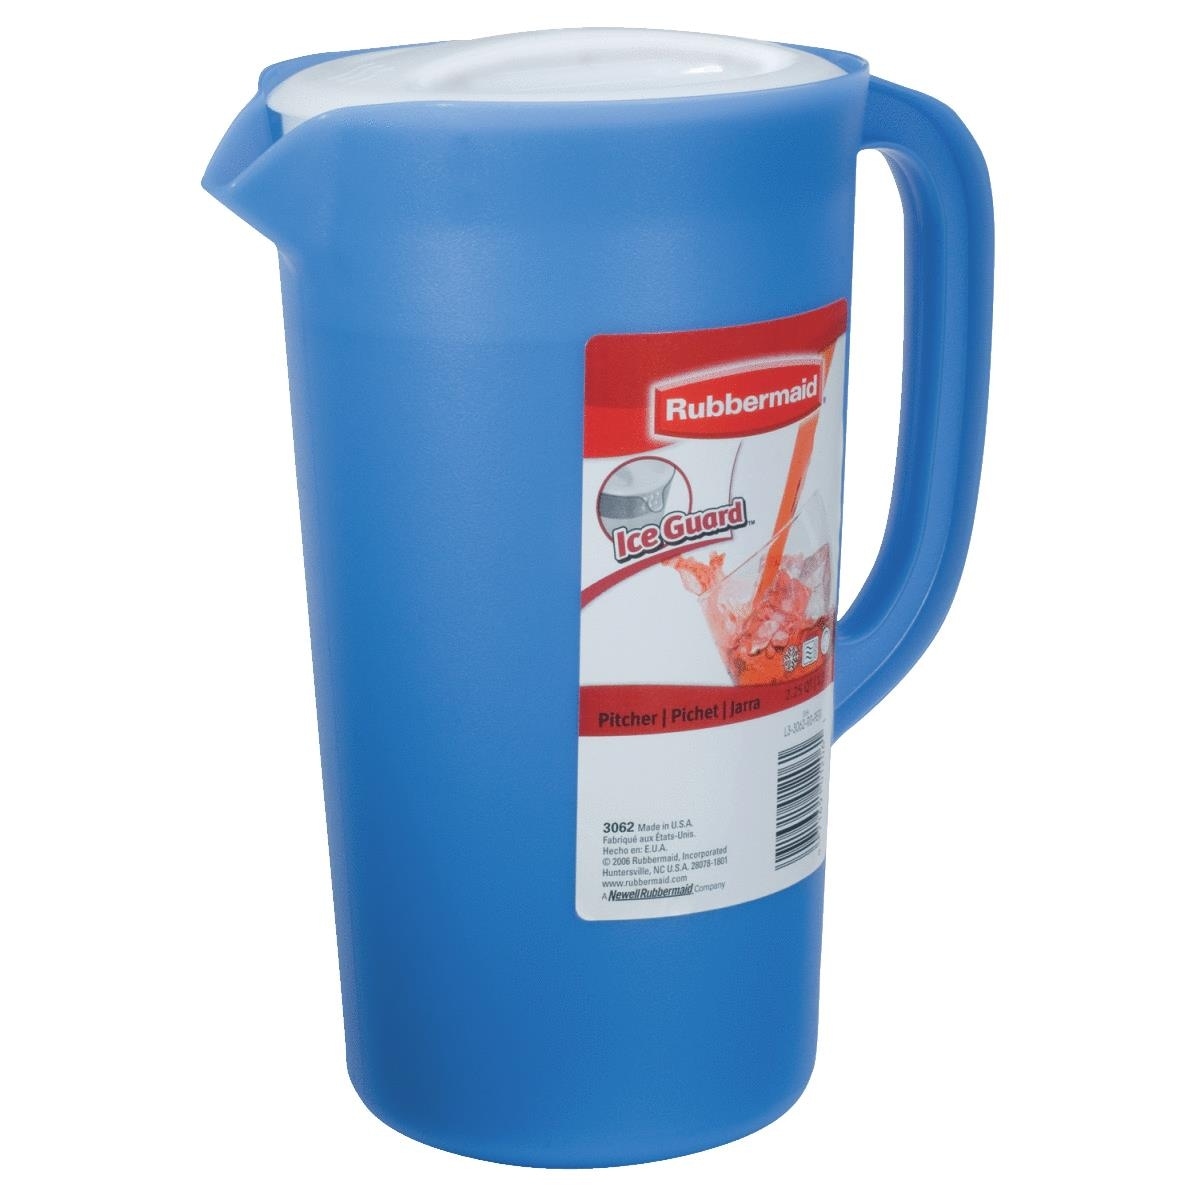 https://ak1.ostkcdn.com/images/products/is/images/direct/3359d3c491629be213f73b17fe00f8371e6cee3e/Rubbermaid-2.25Qt-Pitcher.jpg